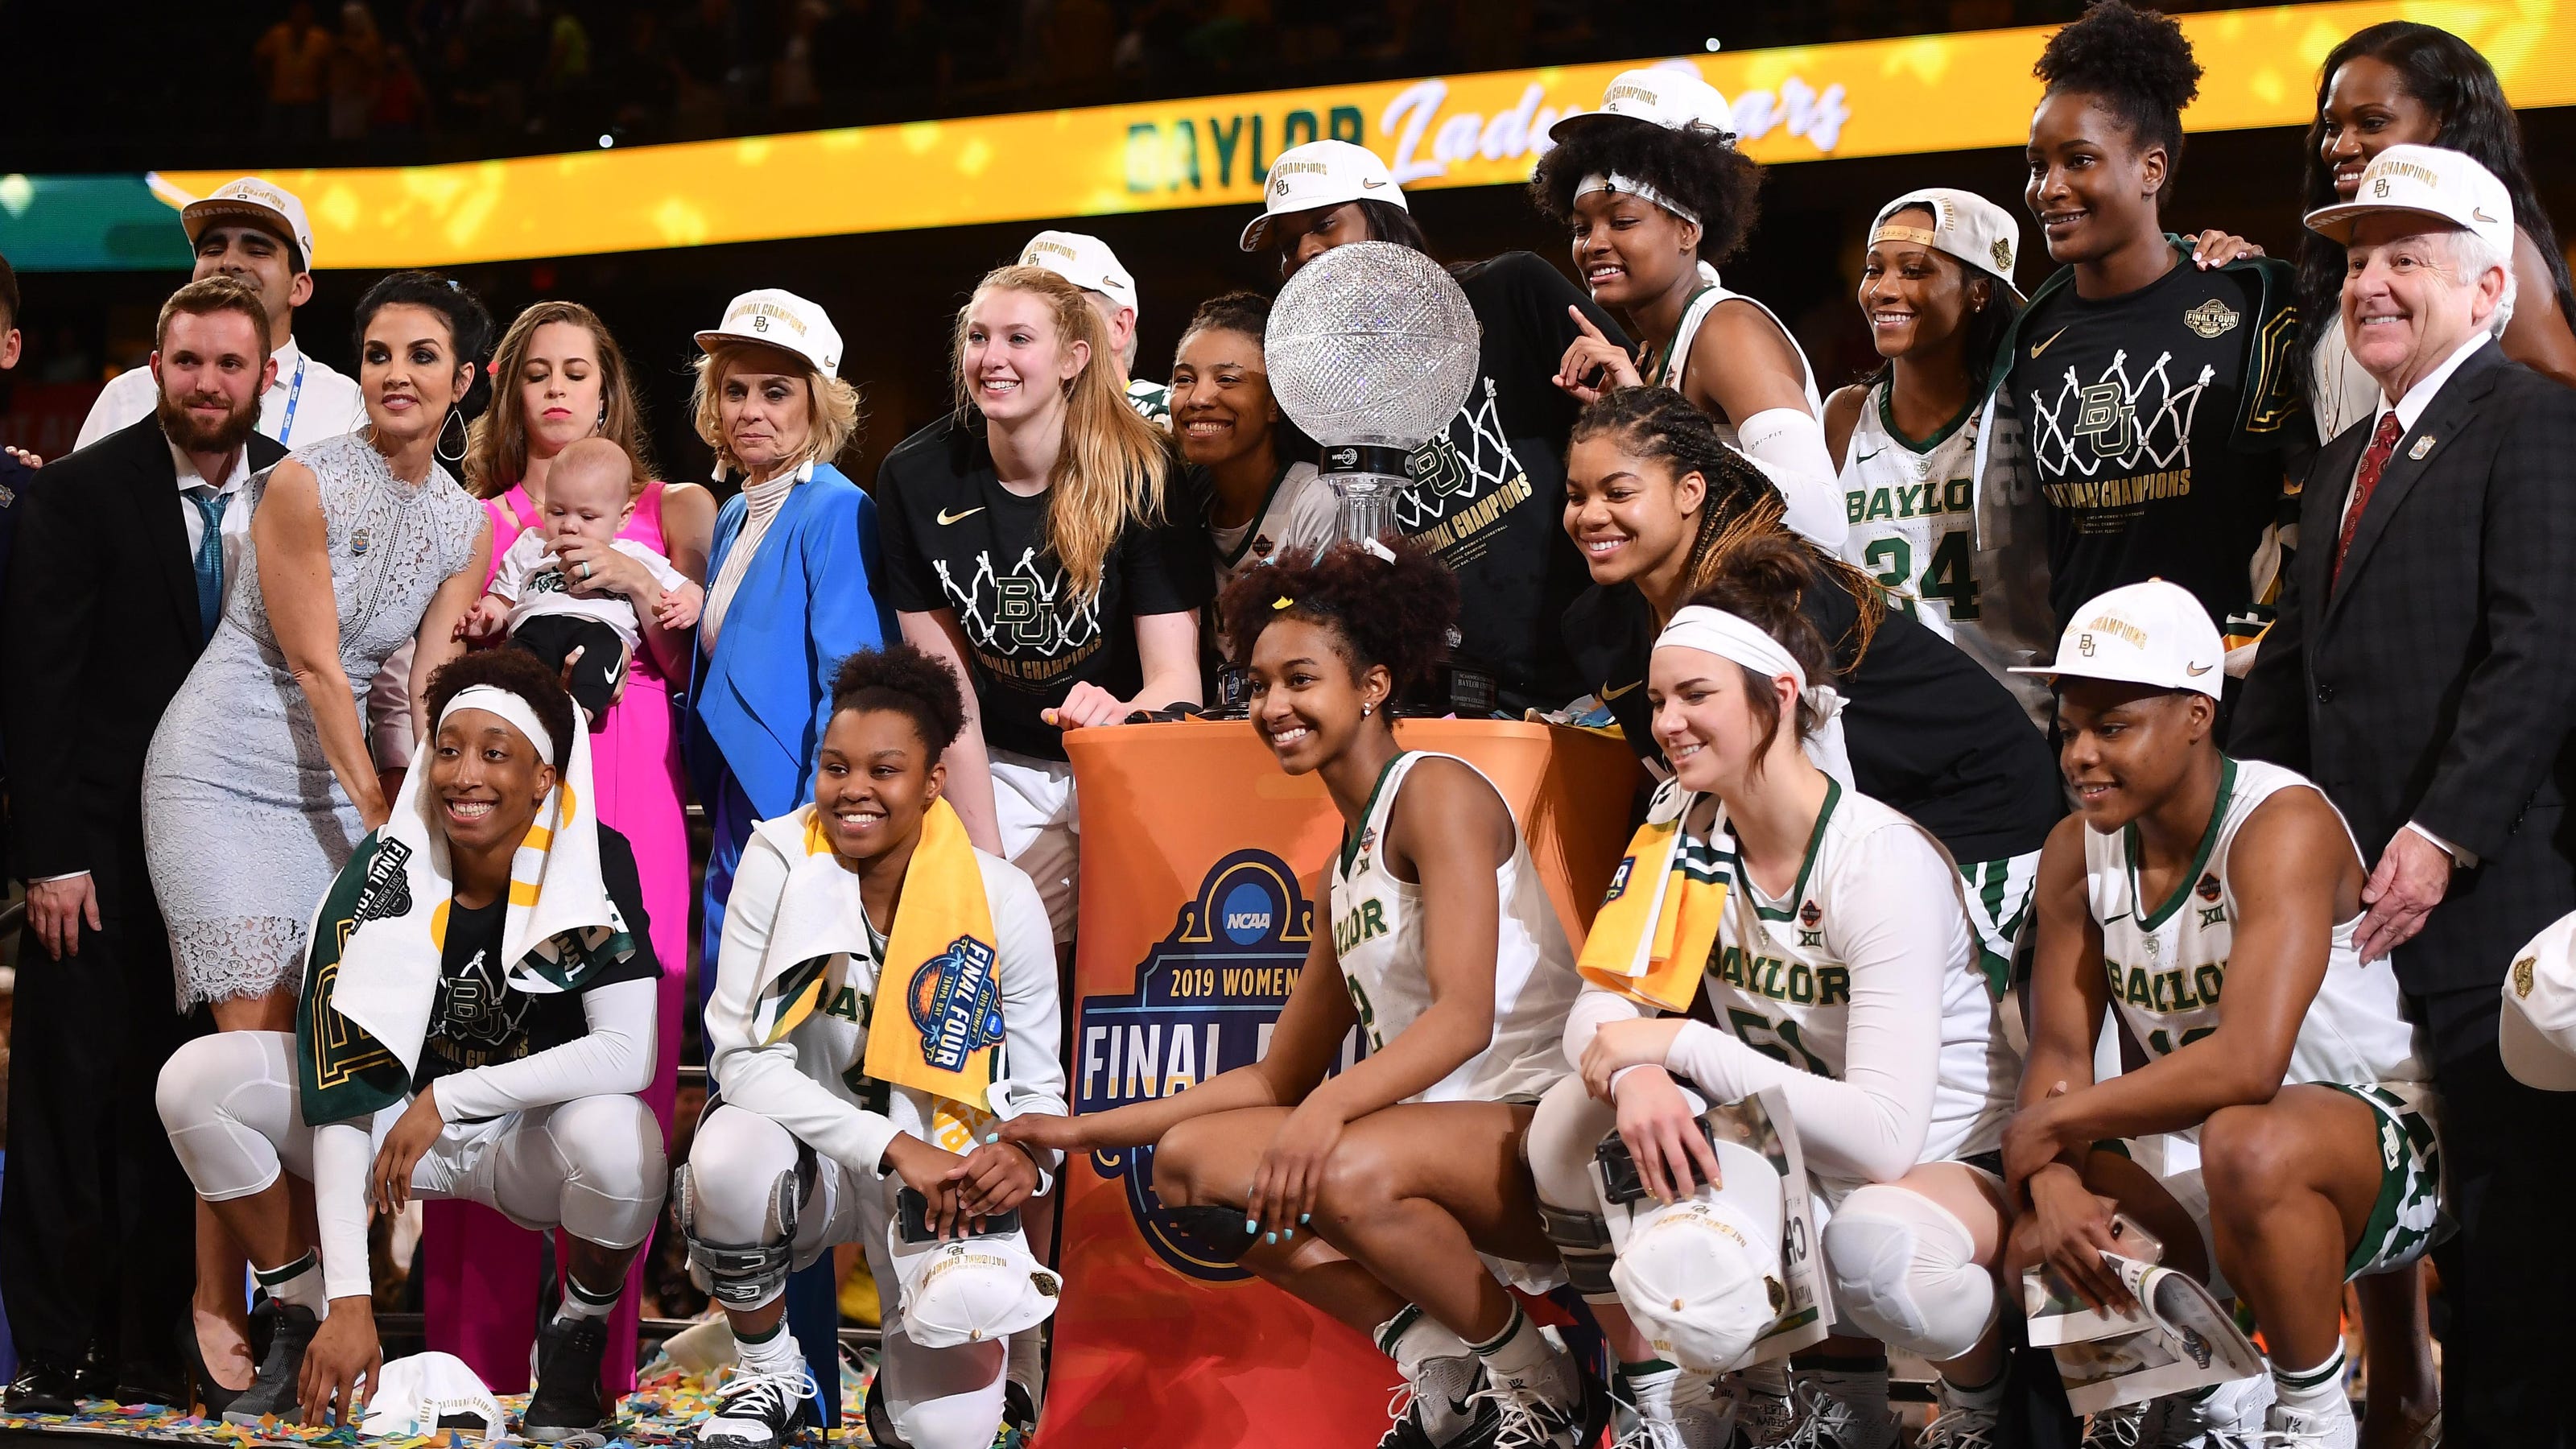 Baylor women hoops team to 1st female team to visit Trump